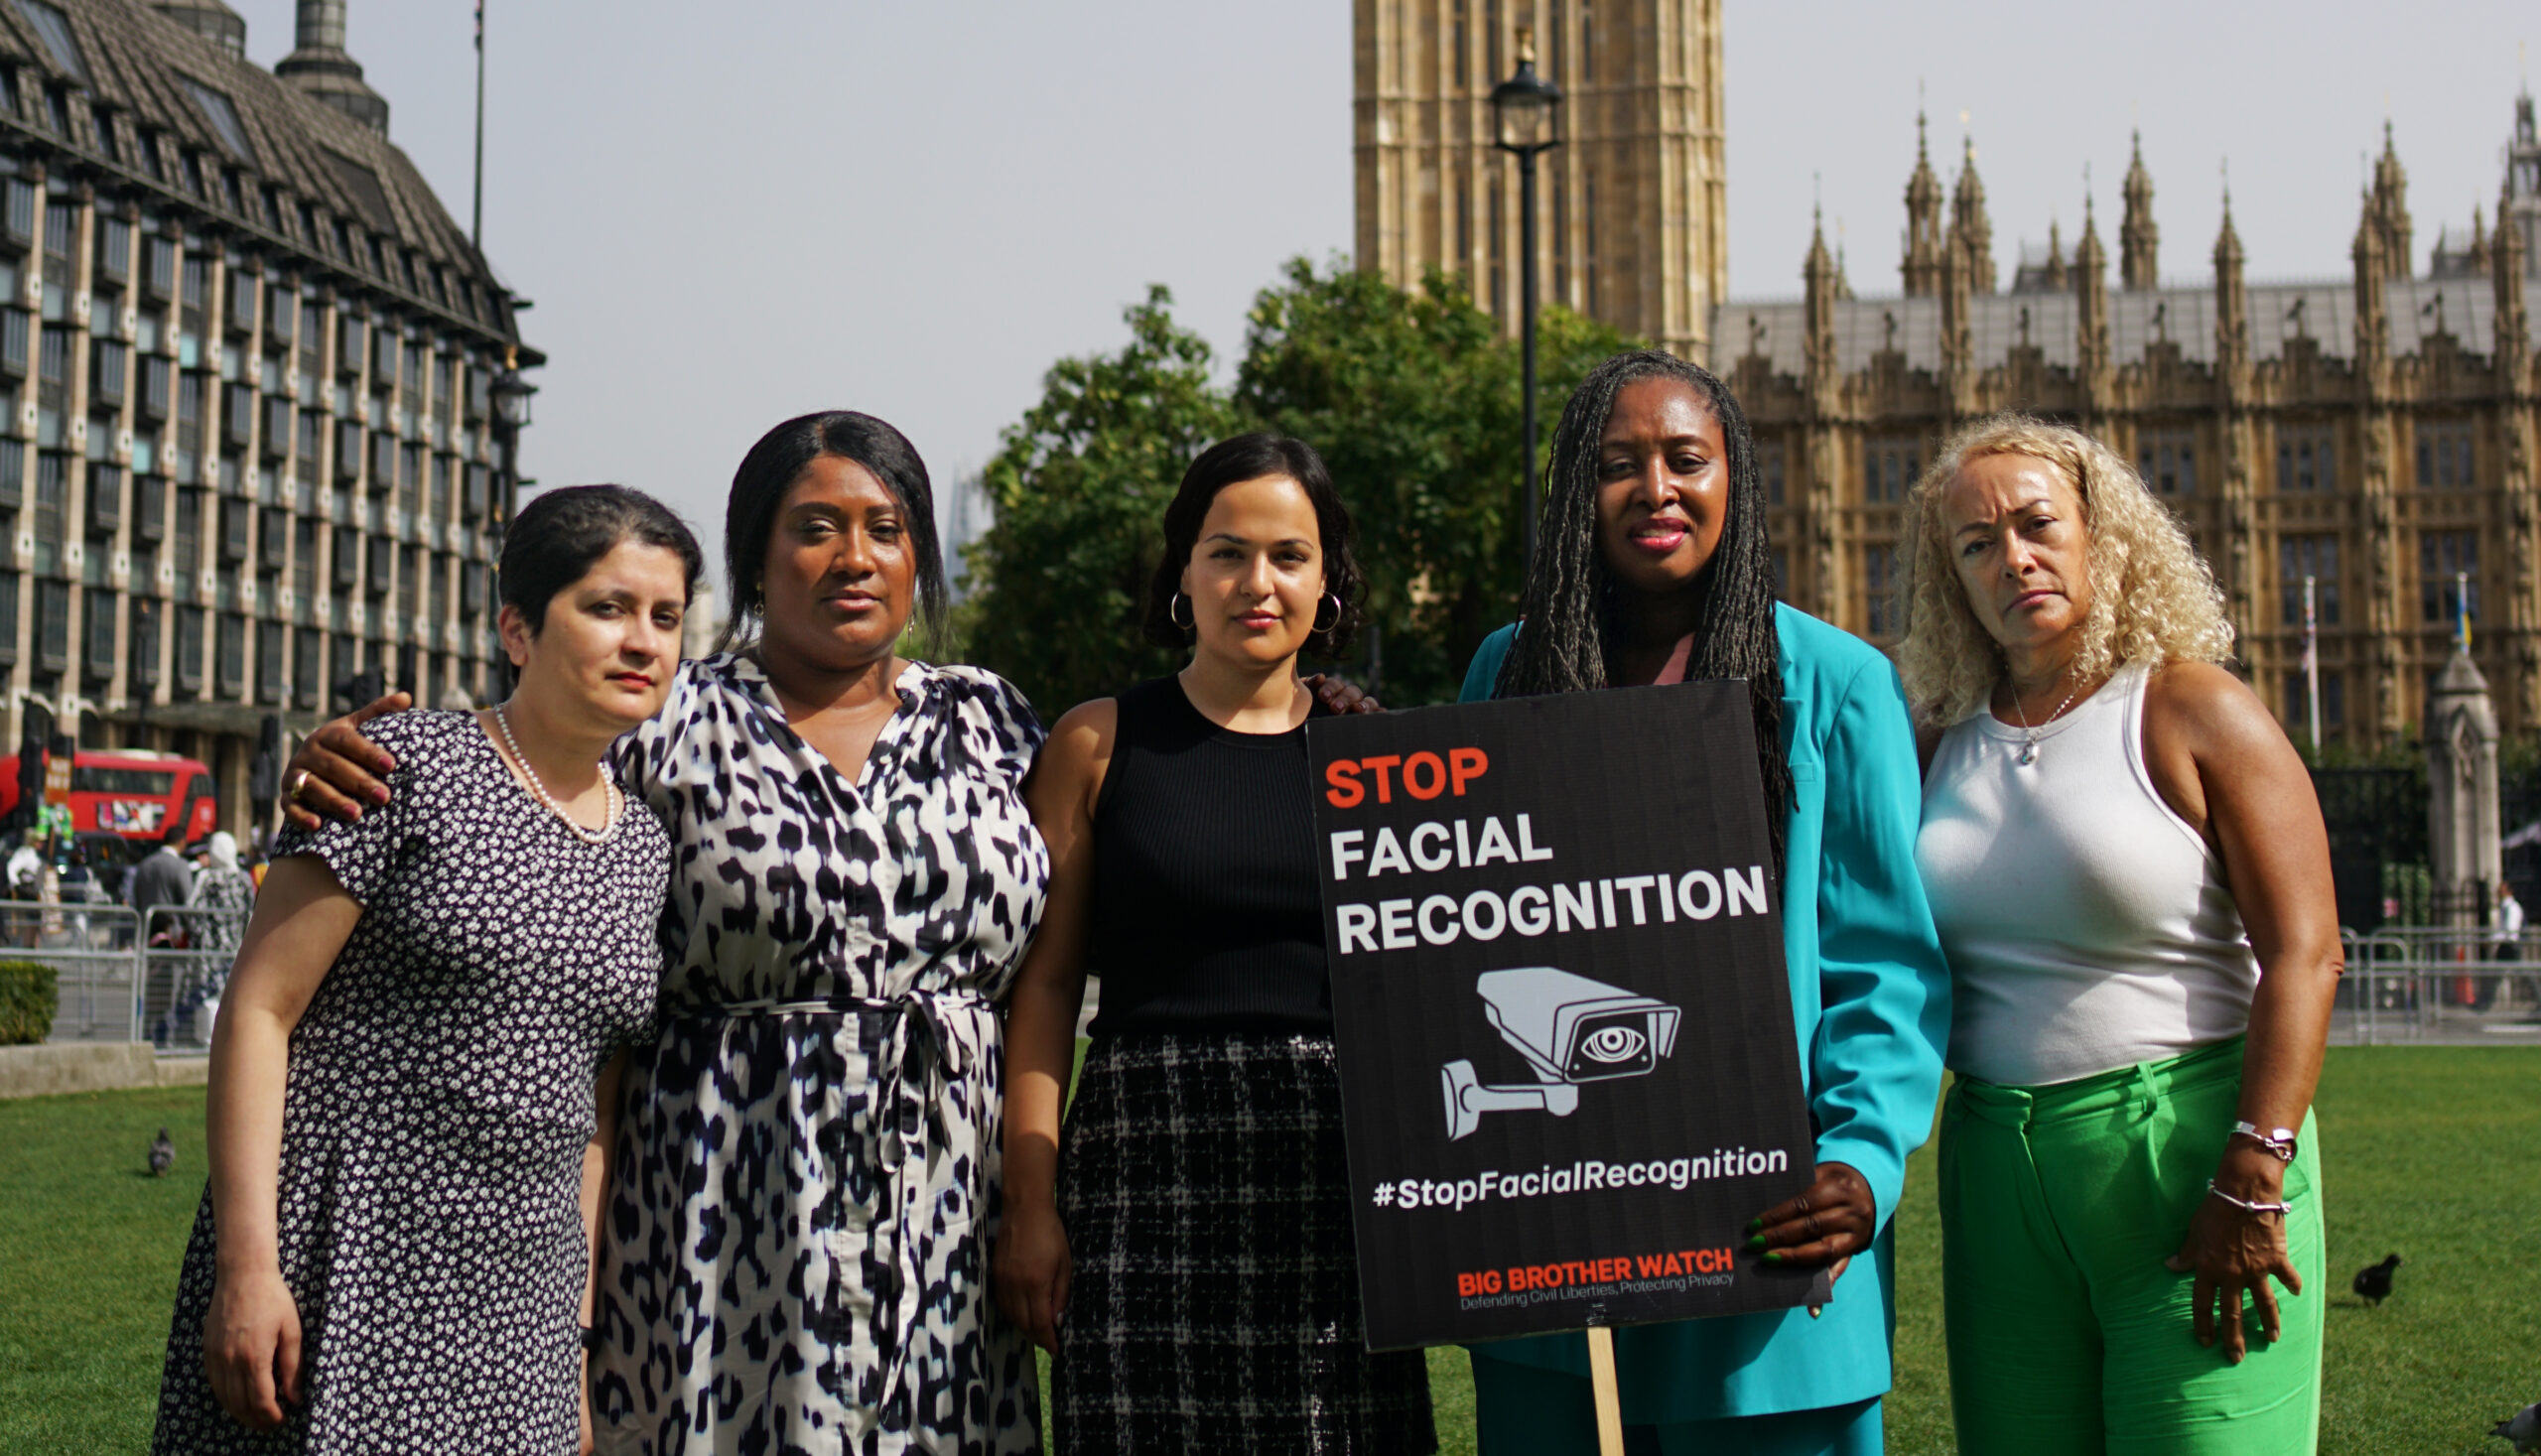 BBC – 65 parliamentarians have joined a call to stop facial recognition